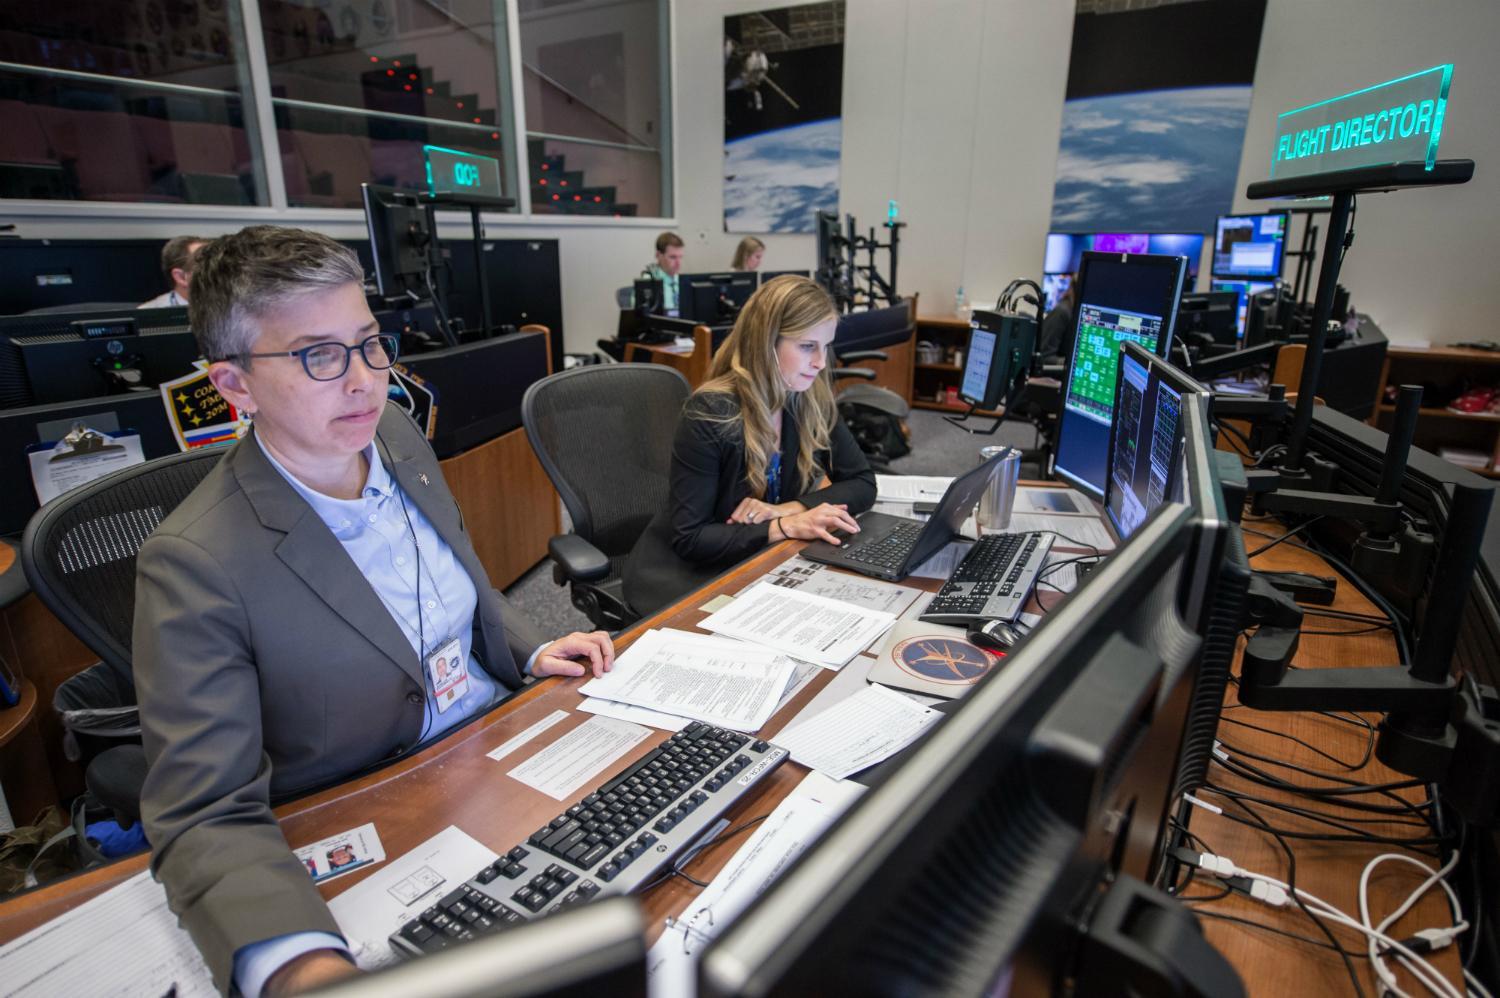 NASA is hiring new flight directors to lead the teams of flight controllers that train, fly and support spacecraft from Mission Control at NASA’s Johnson Space Center in Houston